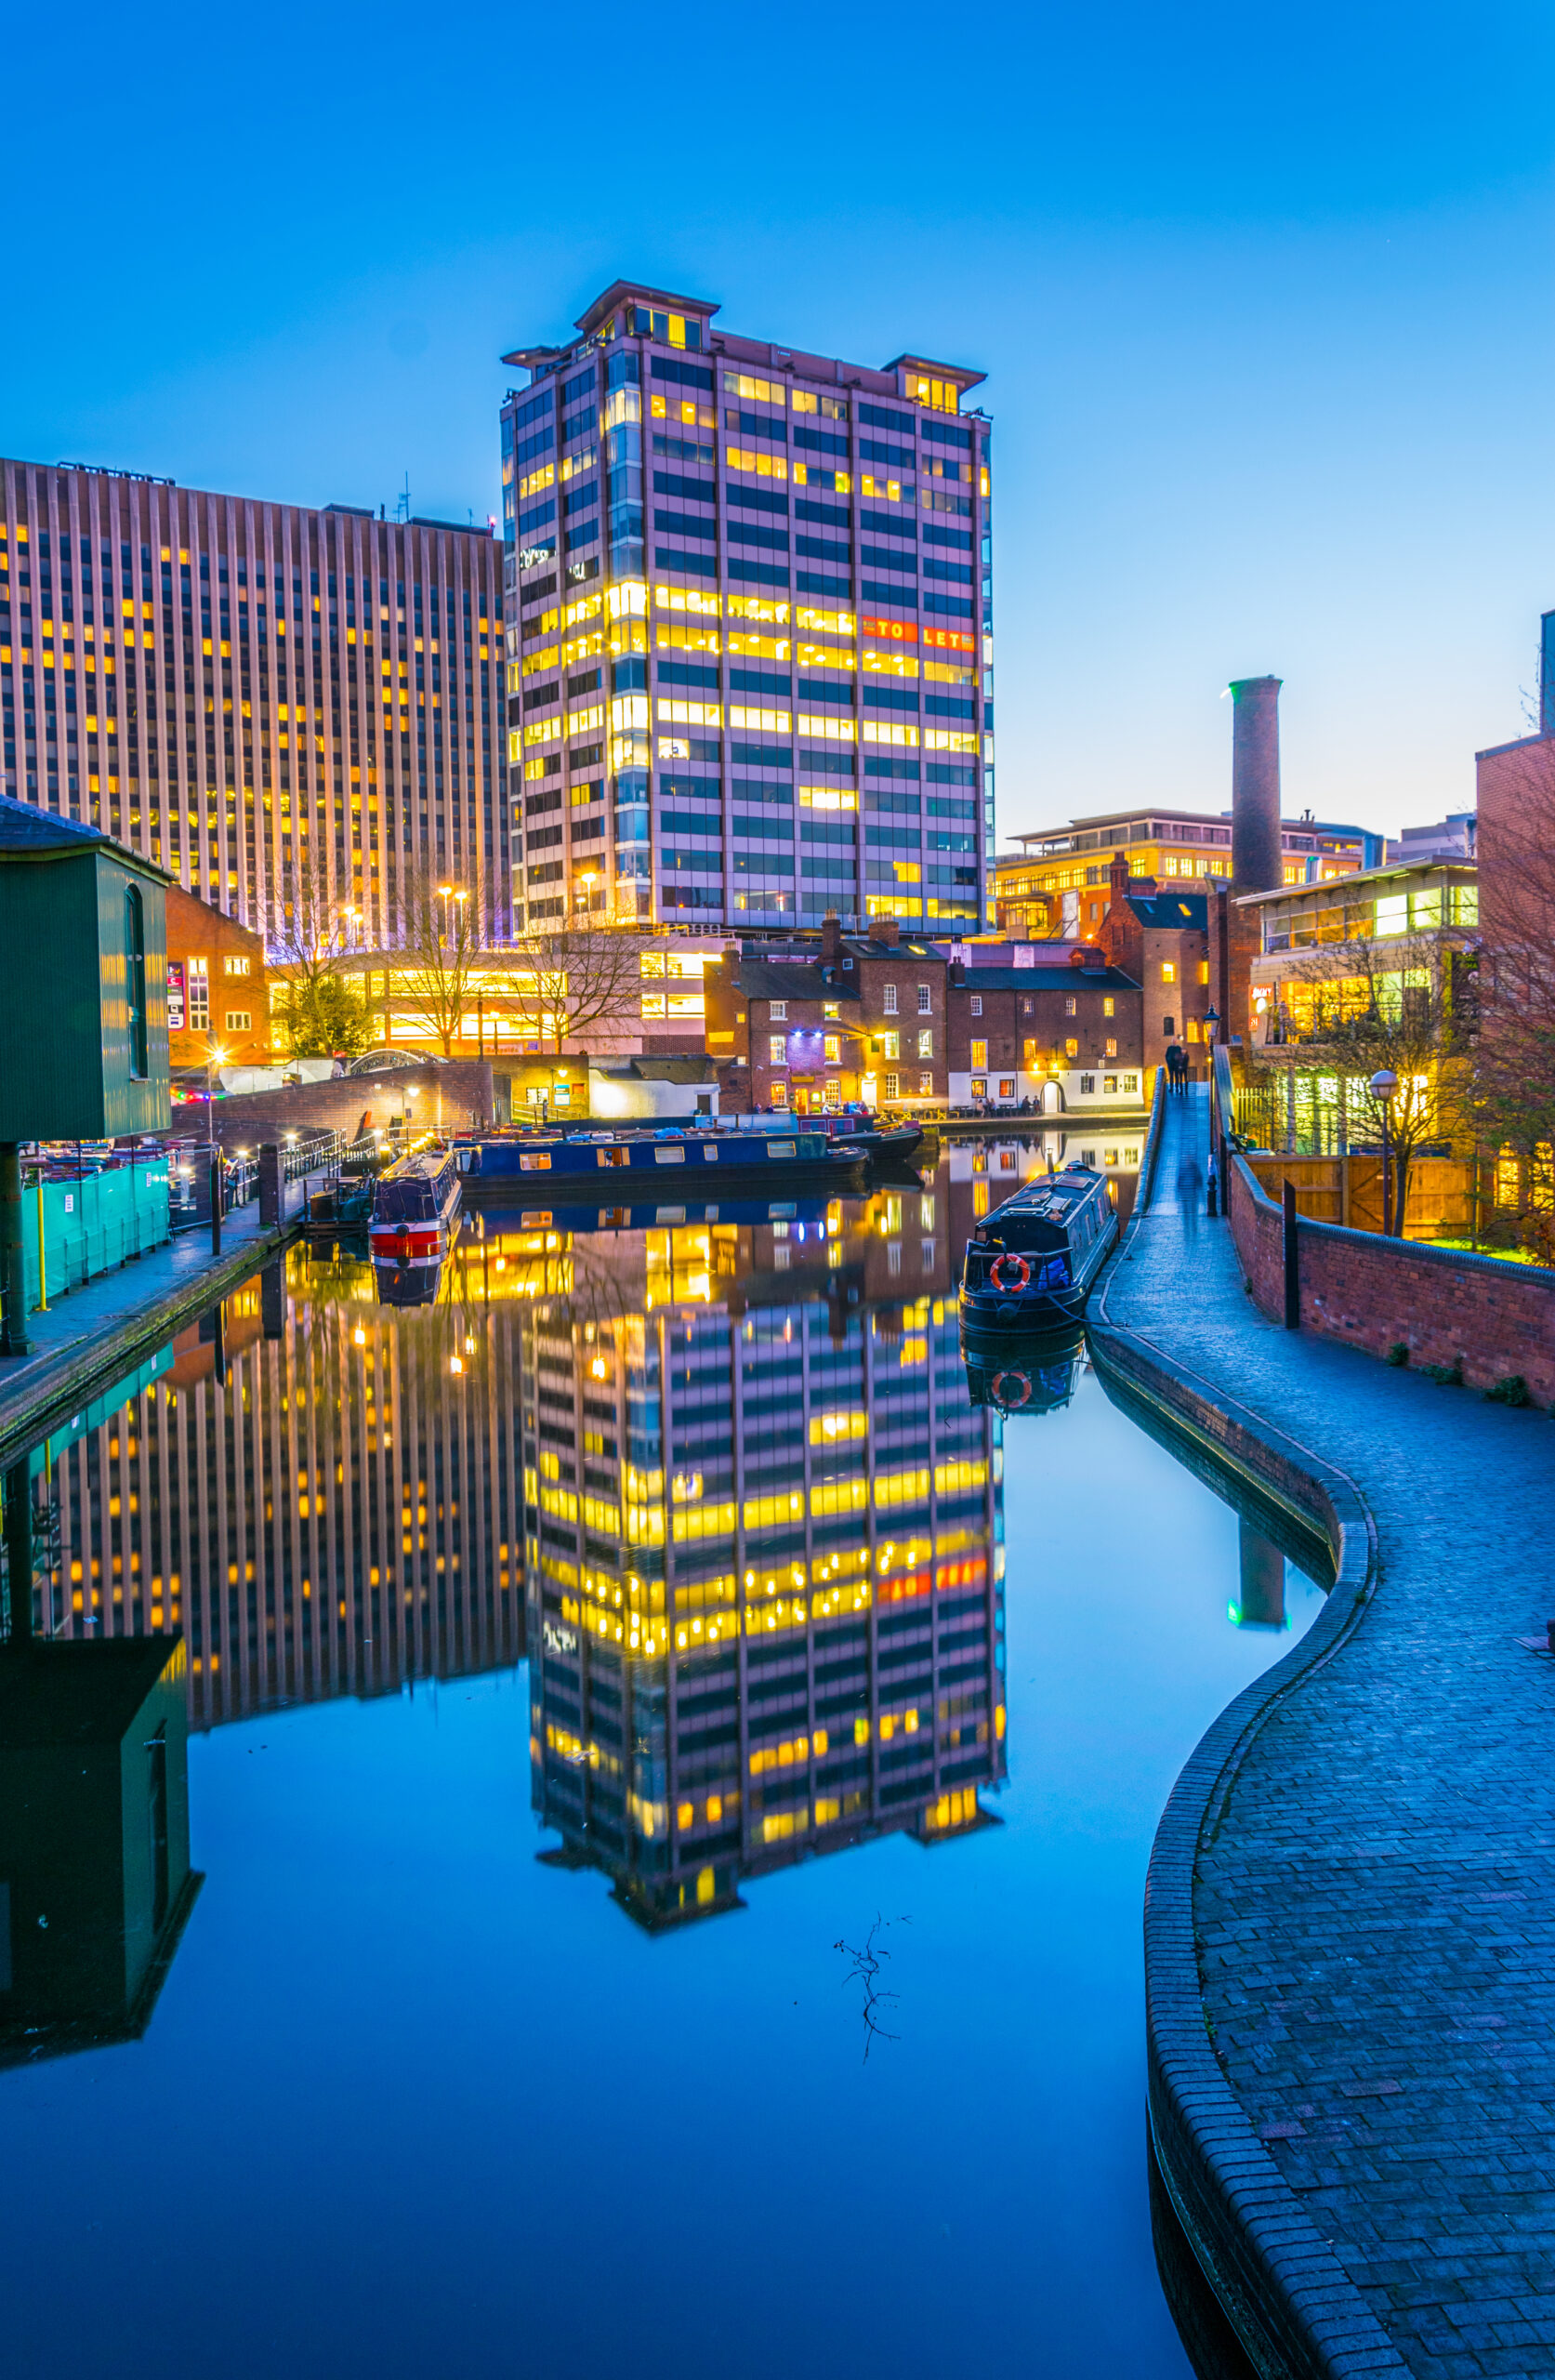 The Best Places To Live in the UK for Expats; Sunset view of brick buildings alongside a water channel in the central Birmingham, England